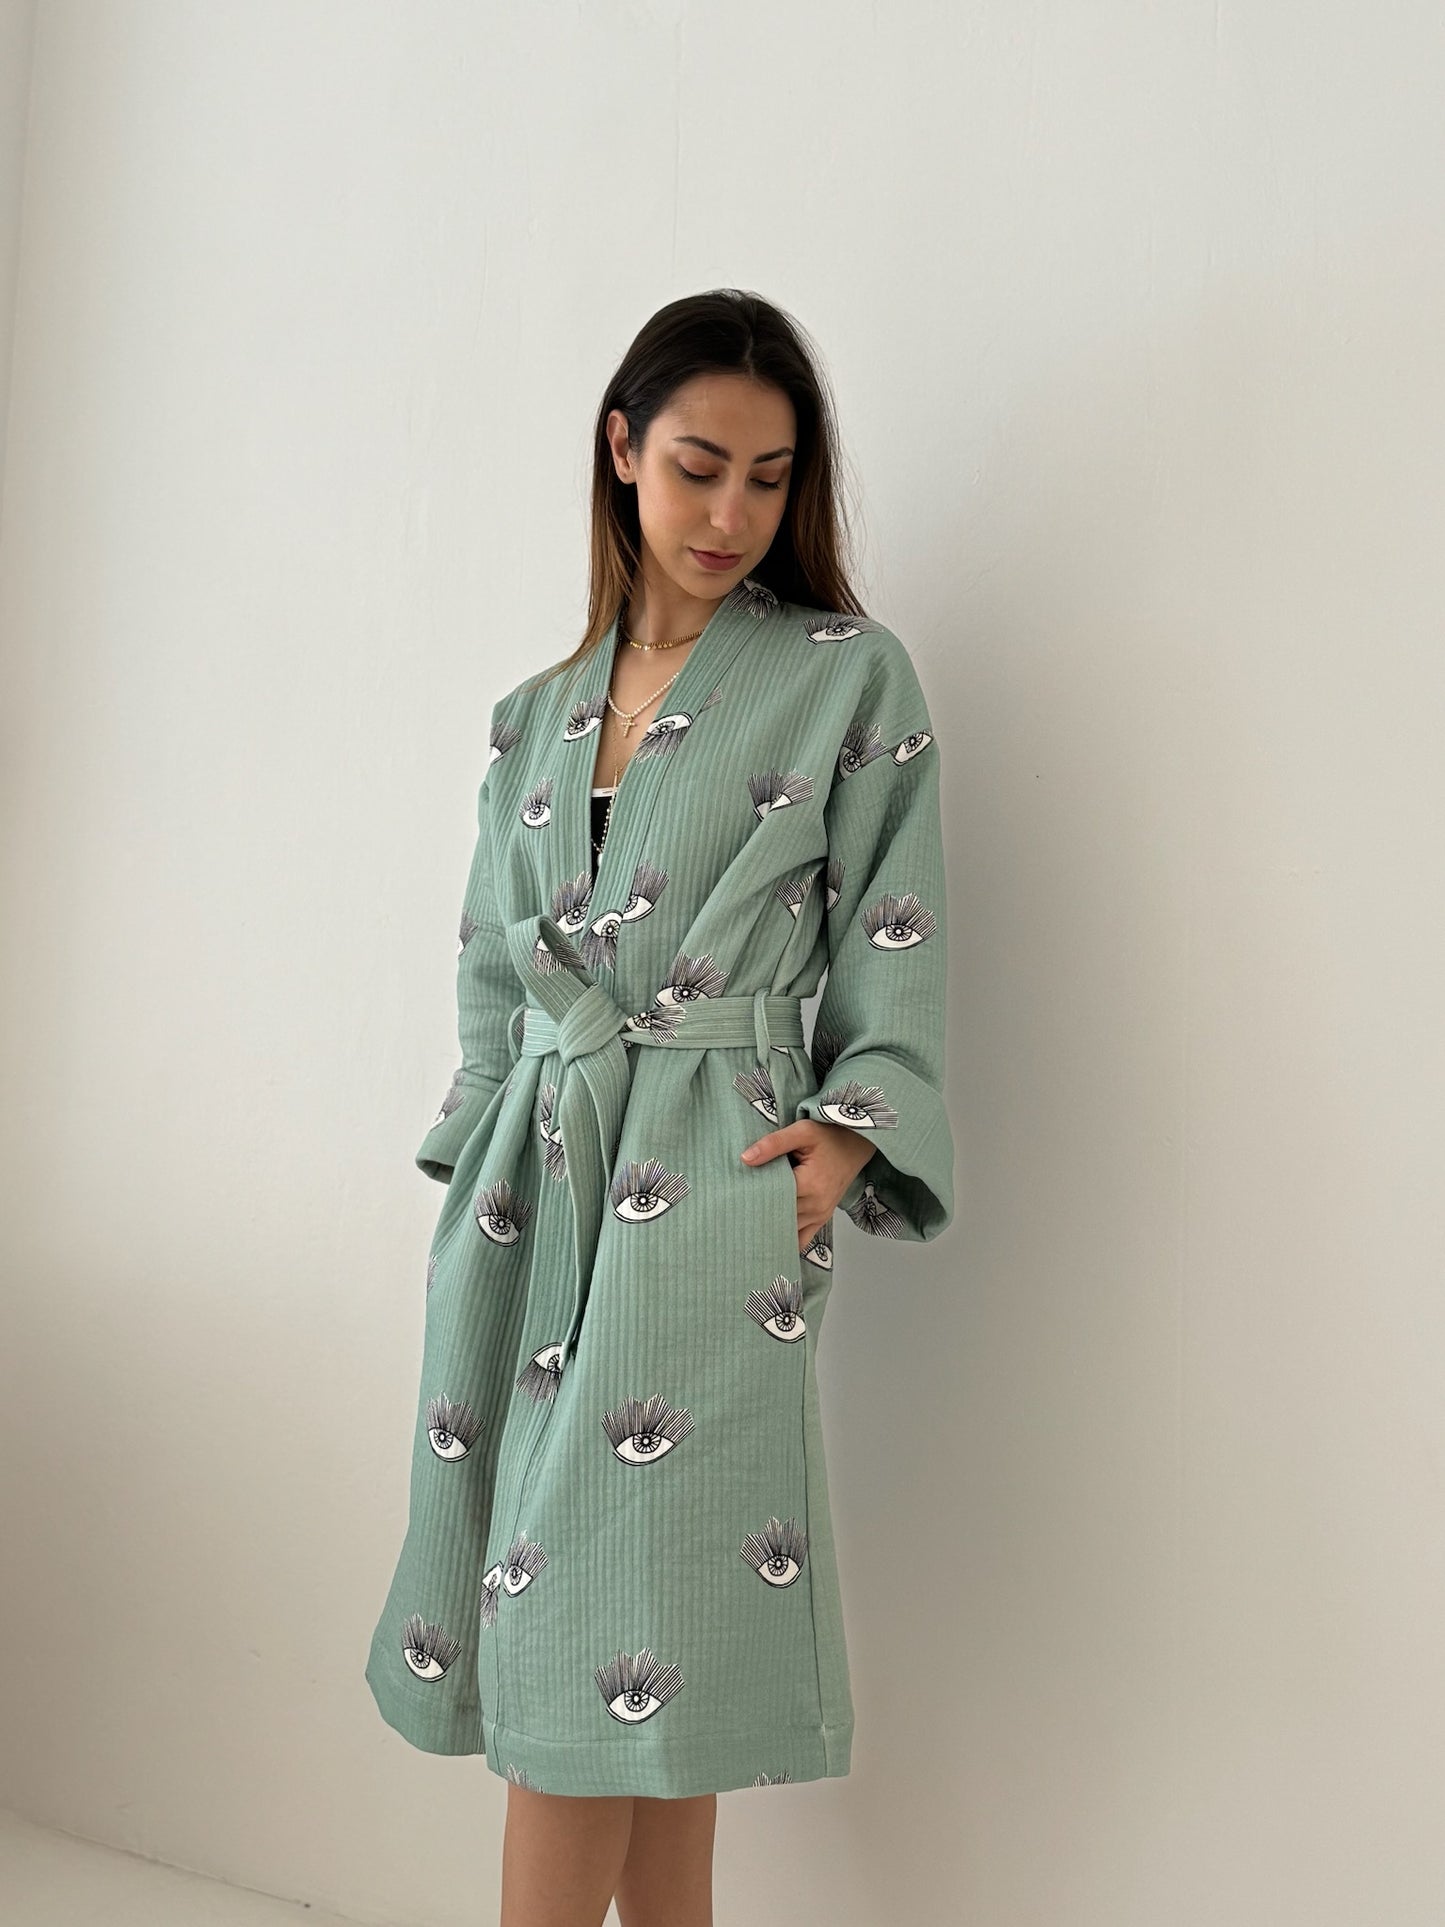 Evil Eye Kimono - Evil Eye Kimono - 100% cotton with evil eye pattern, can be used as a bath or home robe but also as a jacket to wear outside